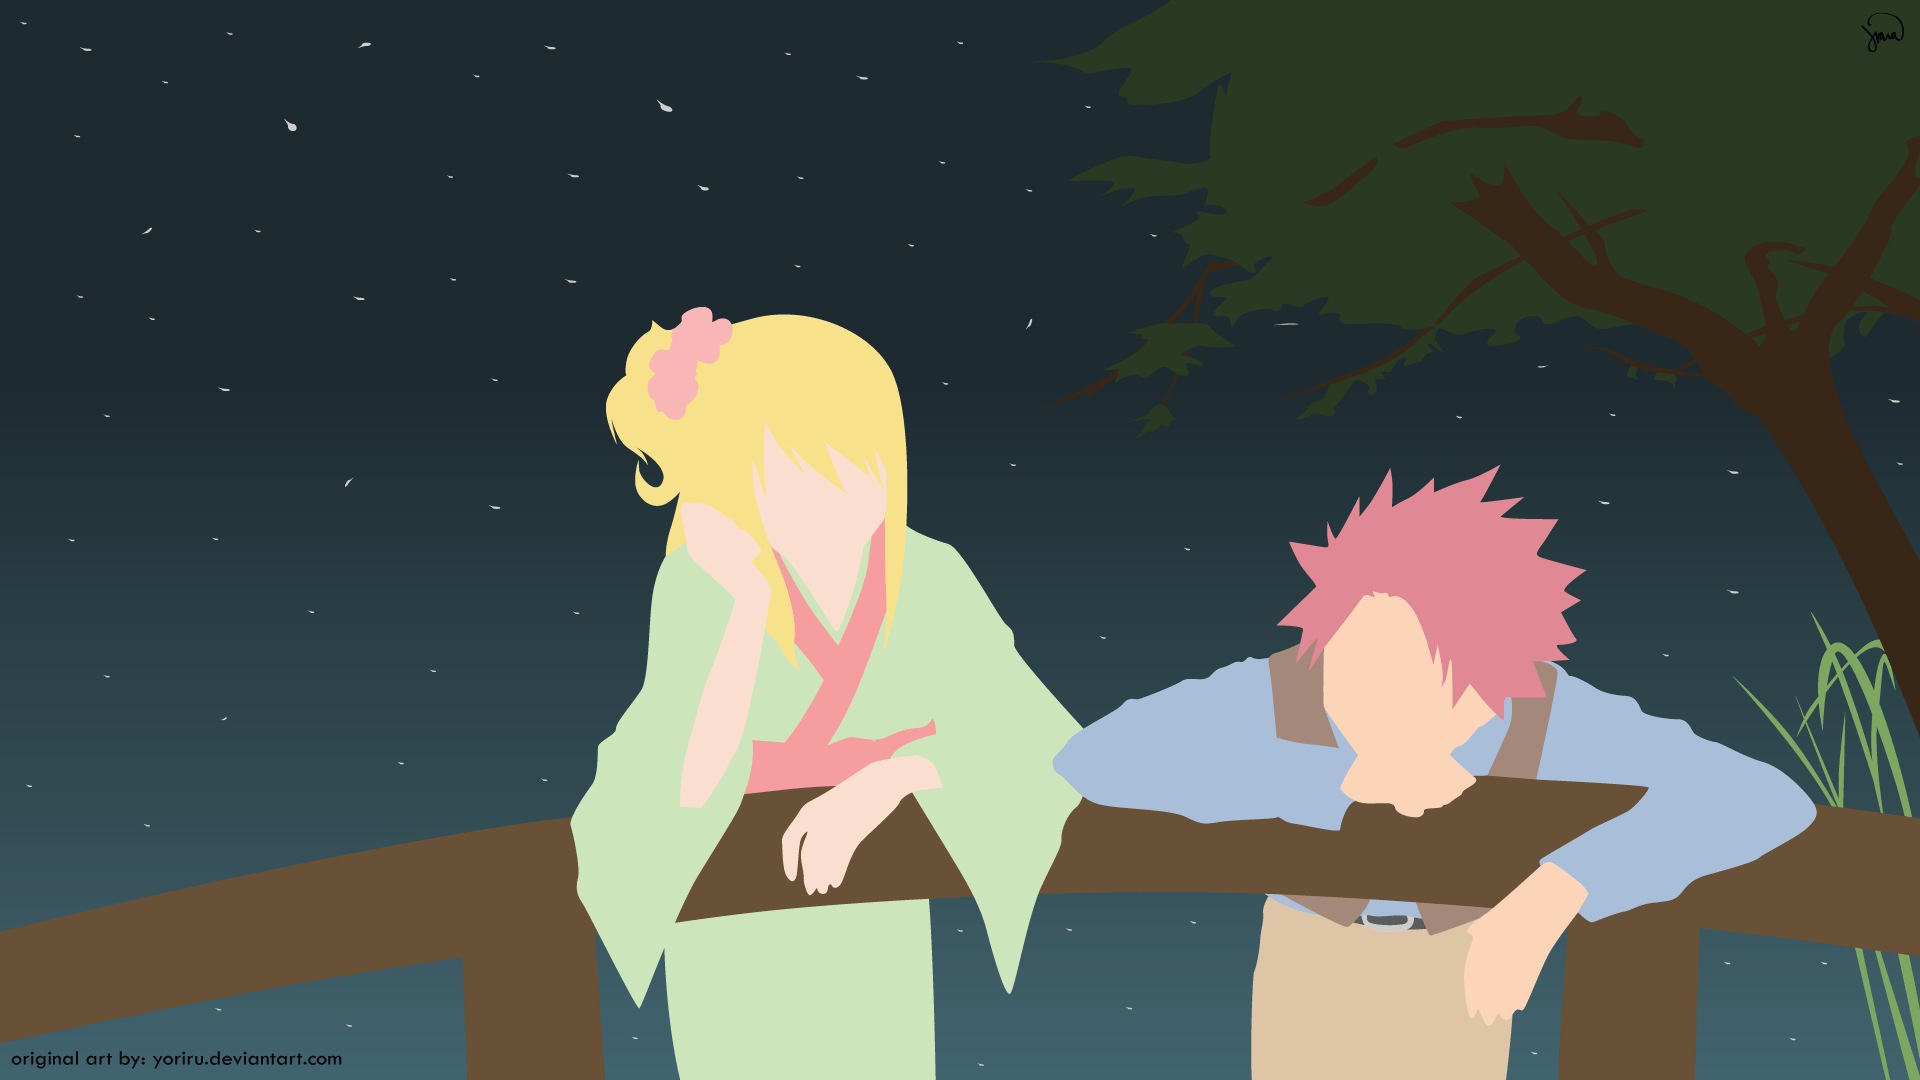 Natsu and Lucy Fairy Tail Minimalistic Wallpapers by greenmapple17